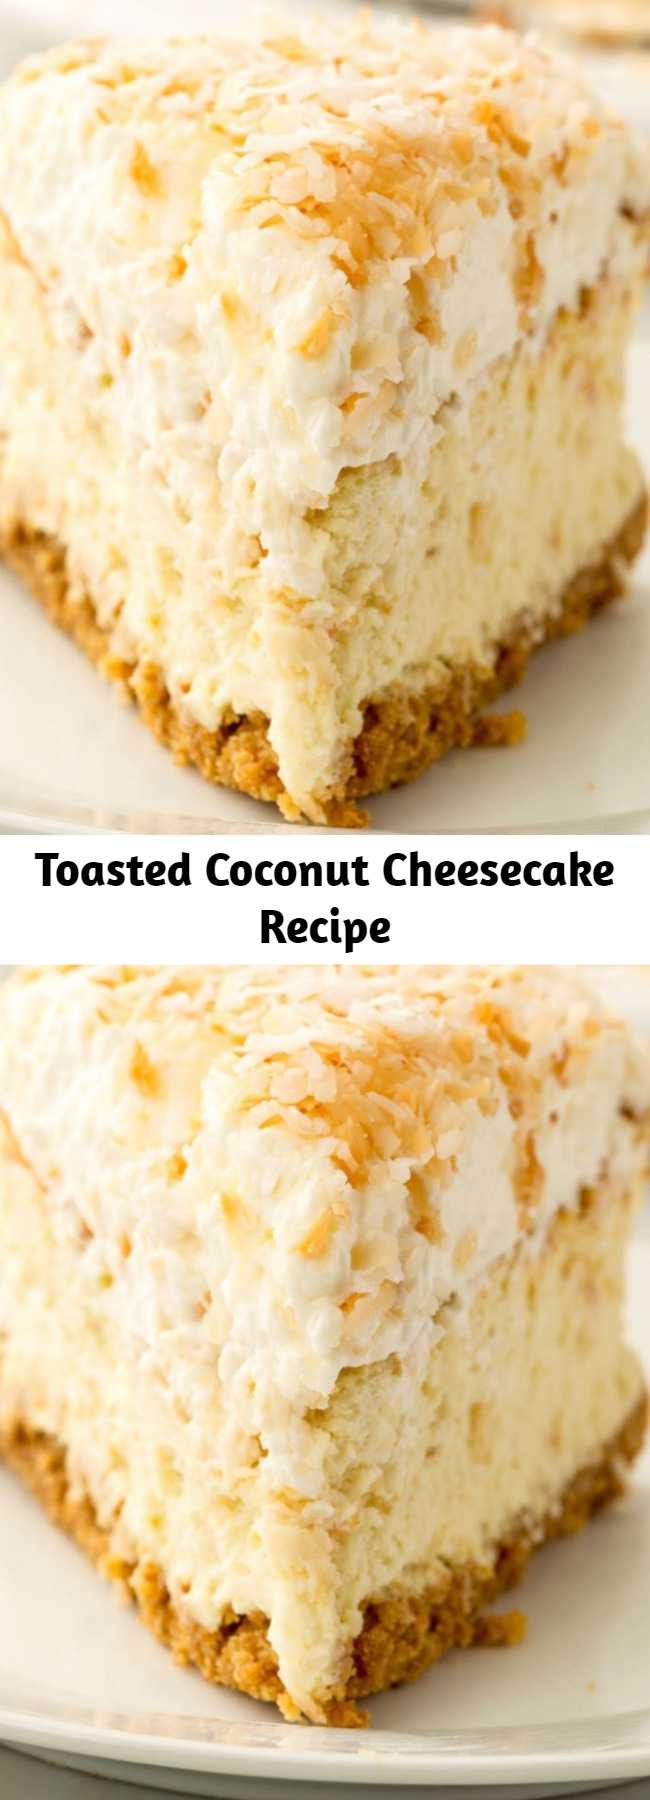 Toasted Coconut Cheesecake Recipe - Looking for a coconut dessert recipe? This Coconut Cheesecake is the best. If you love coconut, you'll go coco loco over this decadently creamy, slightly sweet dessert.